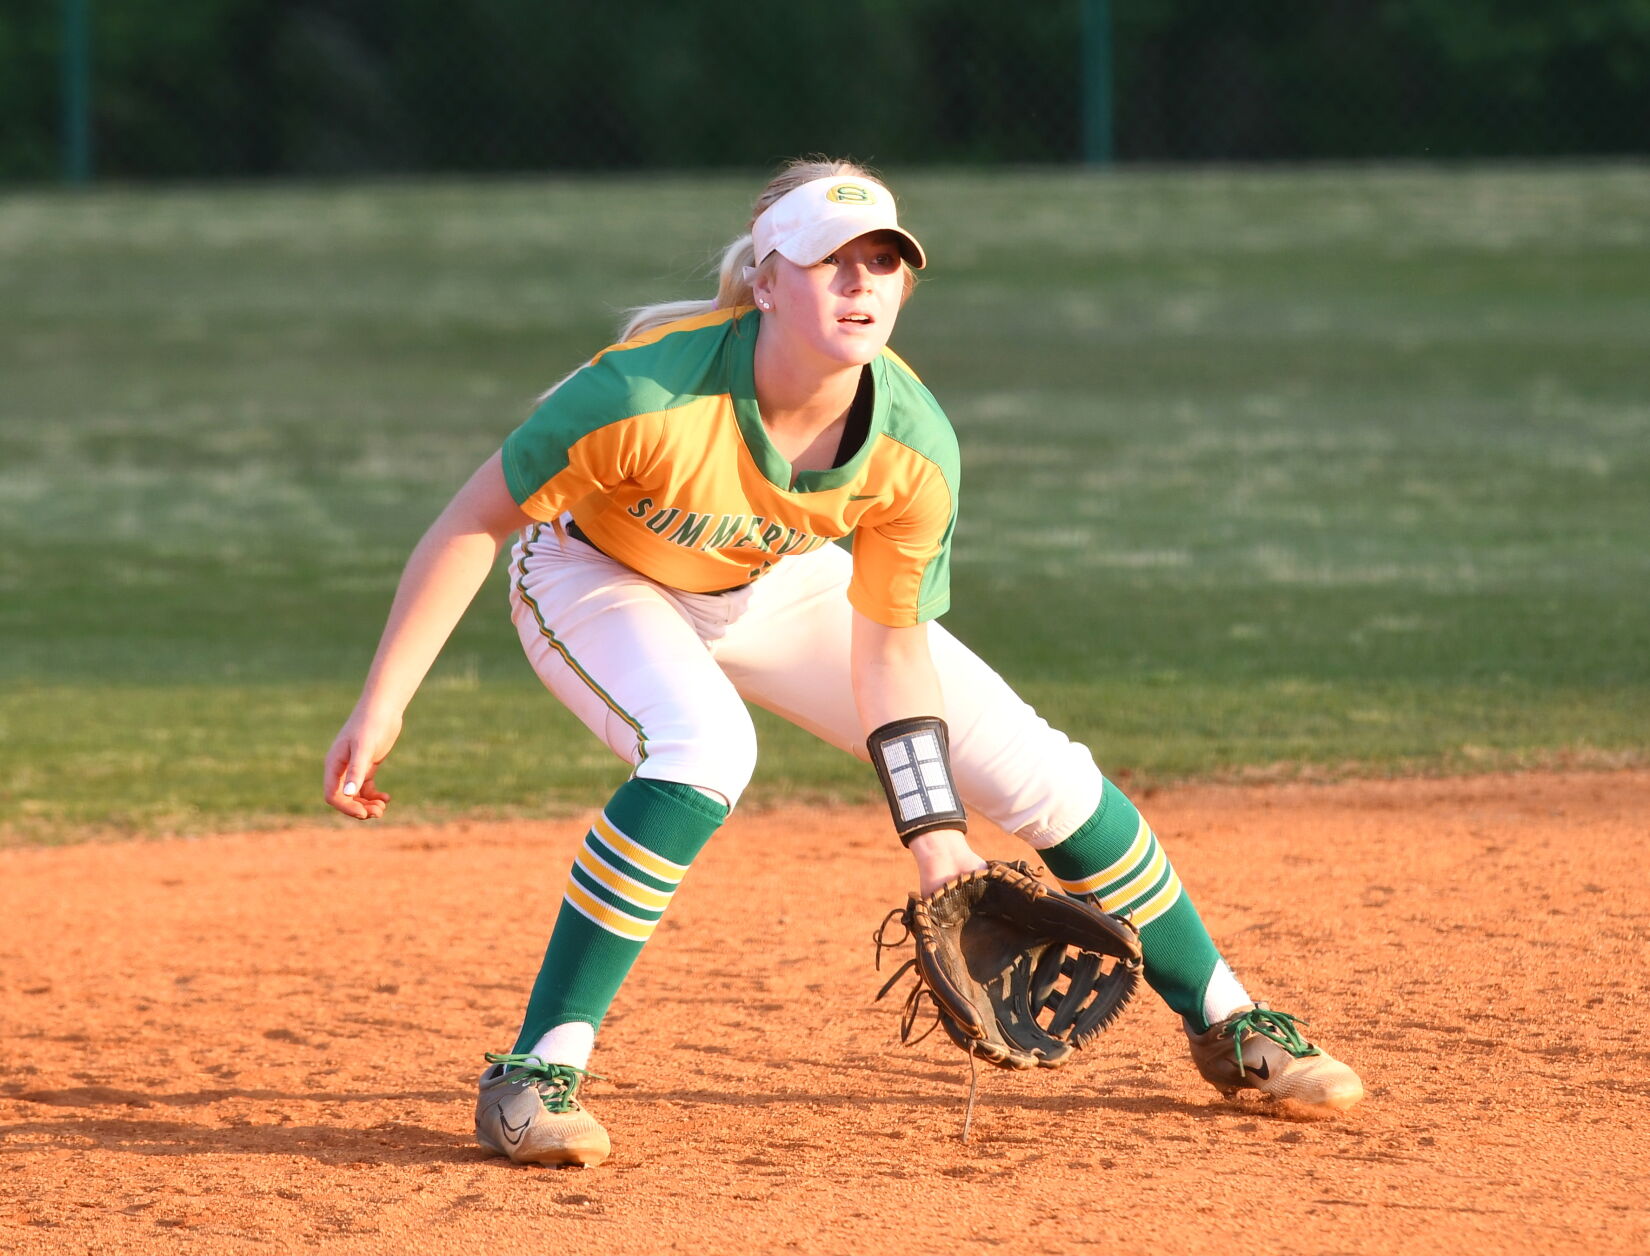 SOFTBALL PLAYER OF THE YEAR: Guilliam anchored the Green Wave infield